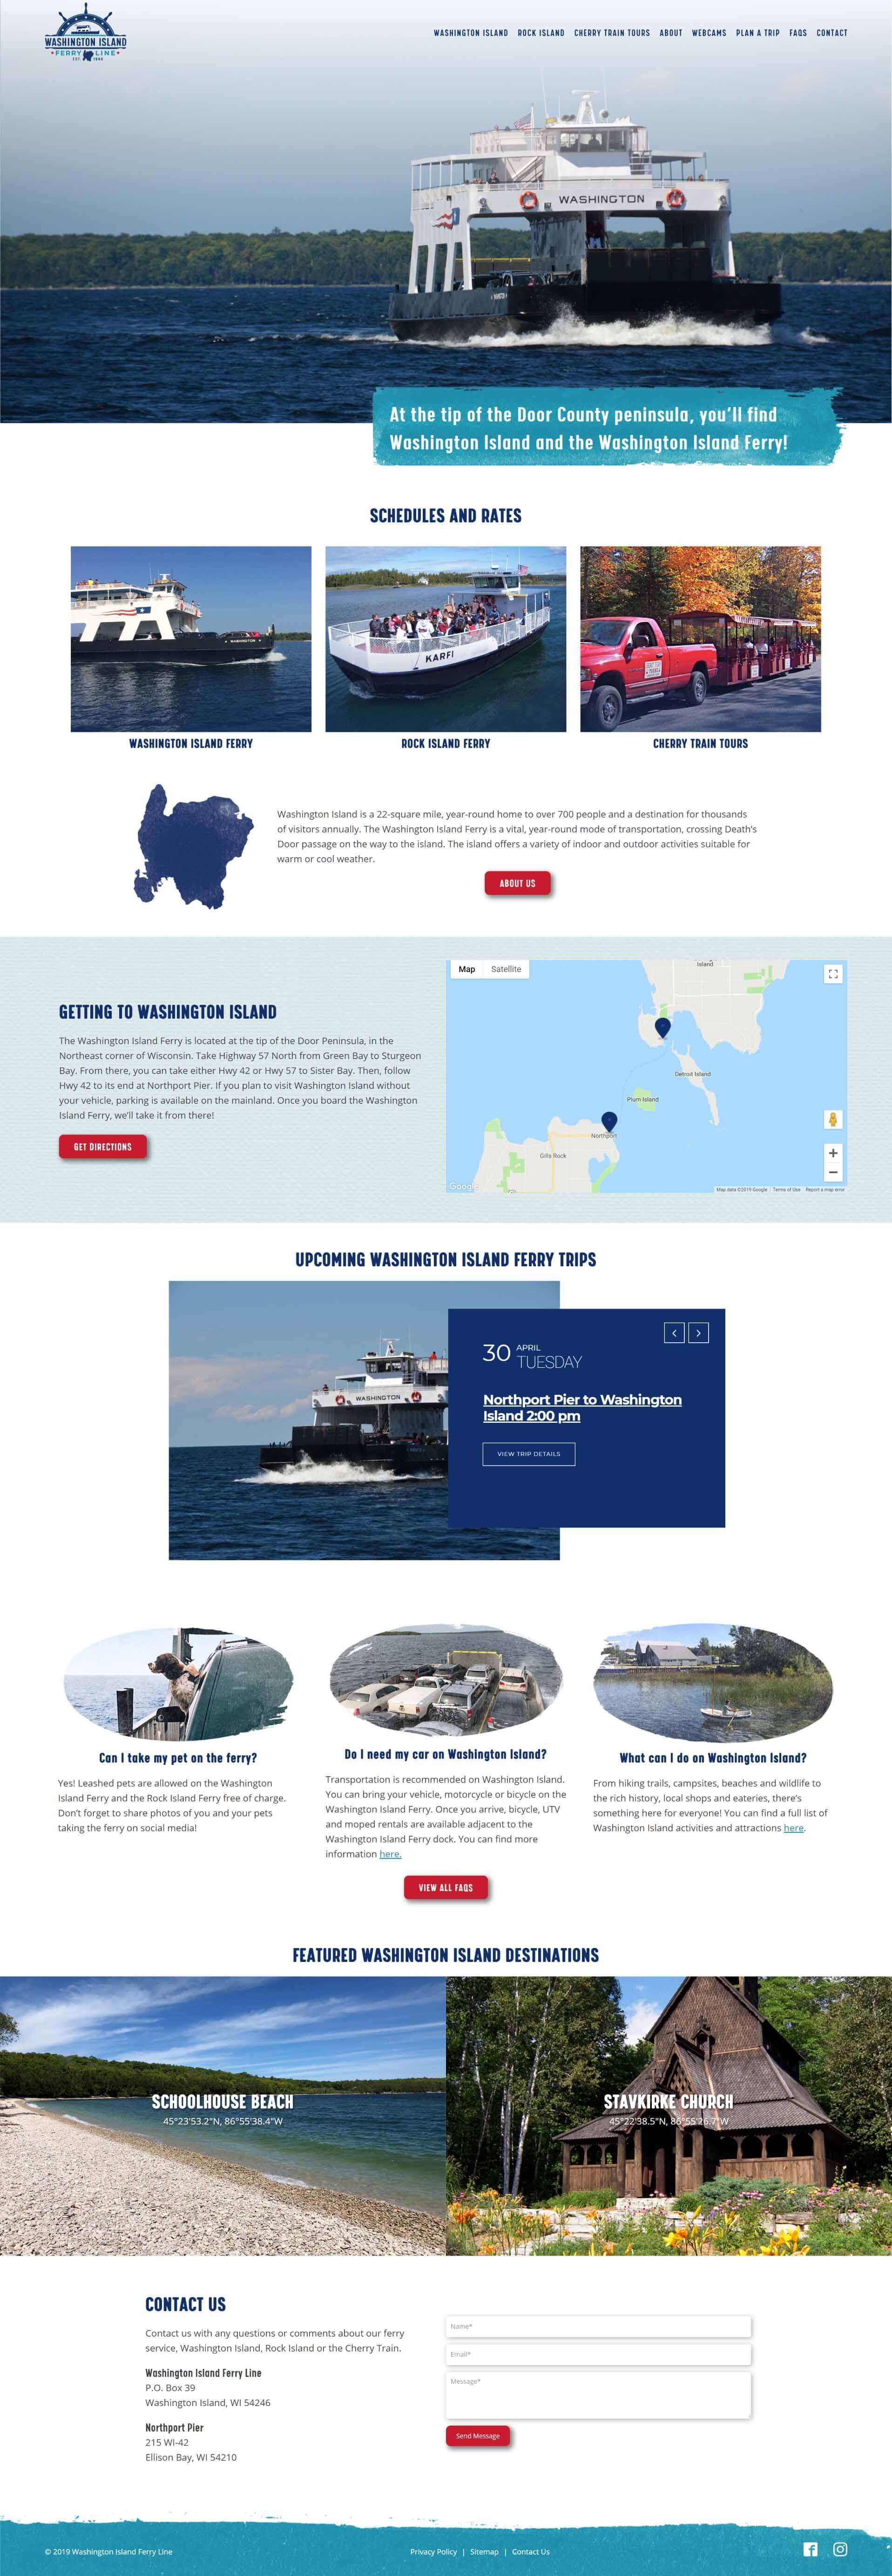 Homepage for a custom website design and development project for Washington Island Ferry Line